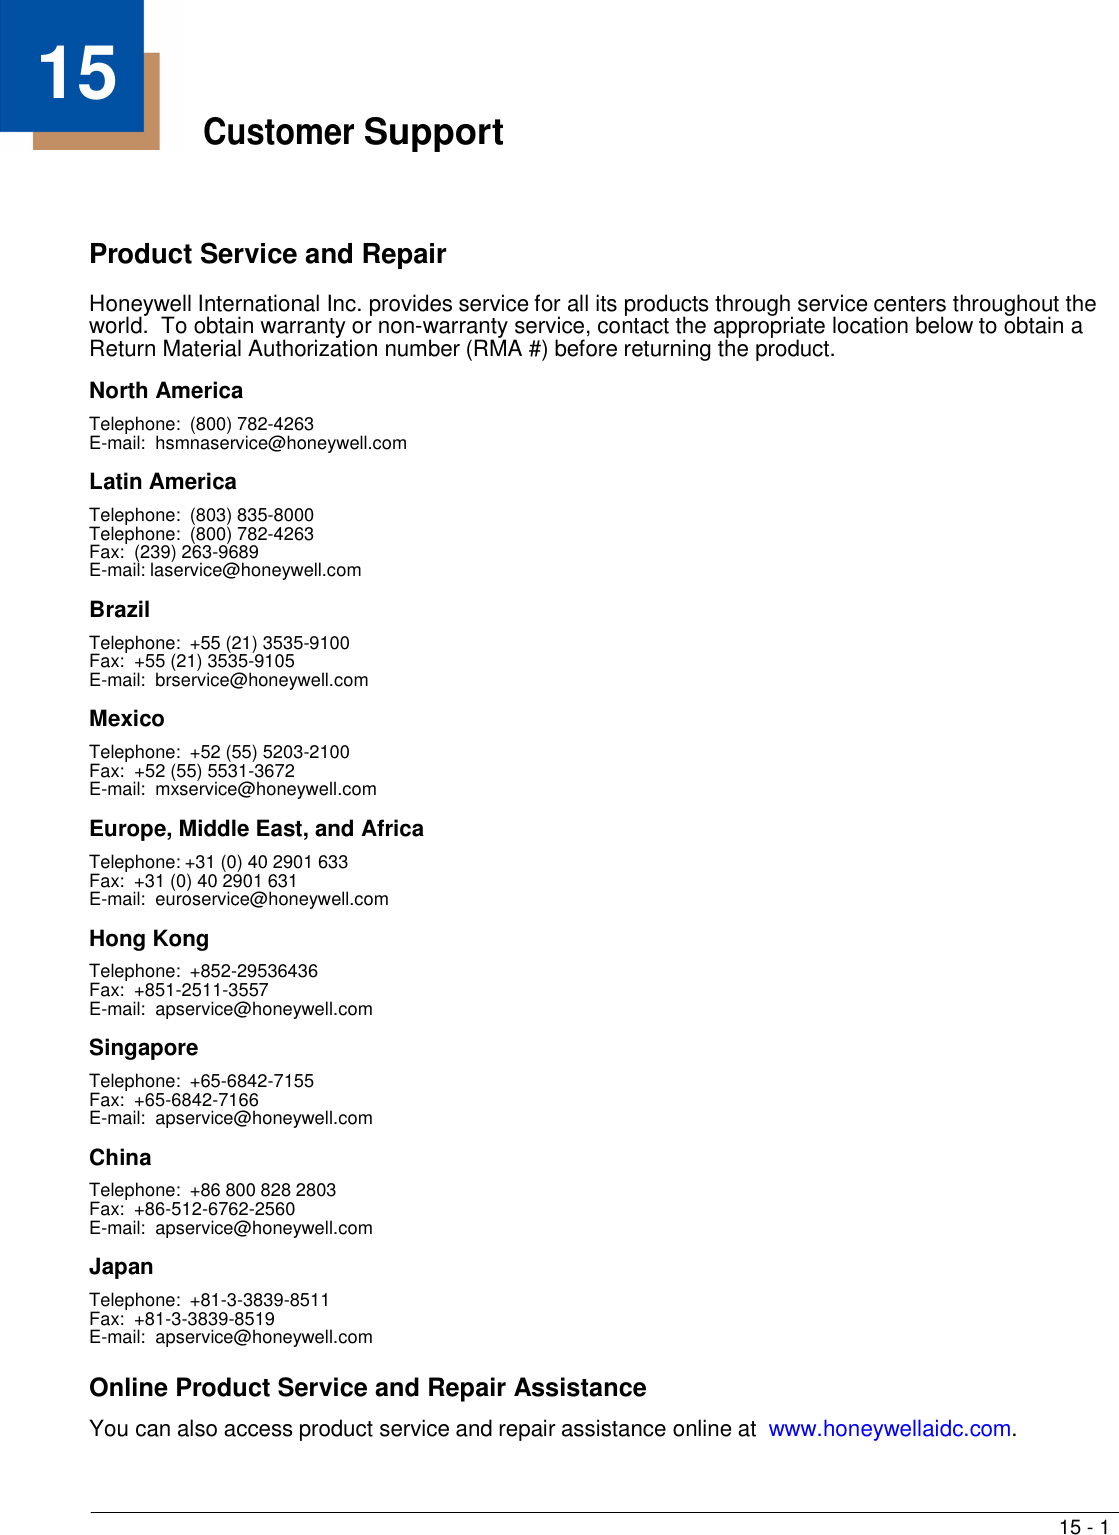 15 - 1   15 Customer Support     Product Service and Repair  Honeywell International Inc. provides service for all its products through service centers throughout the world.  To obtain warranty or non-warranty service, contact the appropriate location below to obtain a Return Material Authorization number (RMA #) before returning the product.  North America Telephone:  (800) 782-4263 E-mail:  hsmnaservice@honeywell.com  Latin America Telephone:  (803) 835-8000 Telephone:  (800) 782-4263 Fax:  (239) 263-9689 E-mail: laservice@honeywell.com  Brazil Telephone:  +55 (21) 3535-9100 Fax:  +55 (21) 3535-9105 E-mail:  brservice@honeywell.com  Mexico Telephone:  +52 (55) 5203-2100 Fax:  +52 (55) 5531-3672 E-mail:  mxservice@honeywell.com  Europe, Middle East, and Africa Telephone: +31 (0) 40 2901 633 Fax:  +31 (0) 40 2901 631 E-mail:  euroservice@honeywell.com  Hong Kong Telephone:  +852-29536436 Fax:  +851-2511-3557 E-mail:  apservice@honeywell.com  Singapore Telephone:  +65-6842-7155 Fax:  +65-6842-7166 E-mail:  apservice@honeywell.com  China Telephone:  +86 800 828 2803 Fax:  +86-512-6762-2560 E-mail:  apservice@honeywell.com  Japan Telephone:  +81-3-3839-8511 Fax:  +81-3-3839-8519 E-mail:  apservice@honeywell.com  Online Product Service and Repair Assistance  You can also access product service and repair assistance online at  www.honeywellaidc.com. 